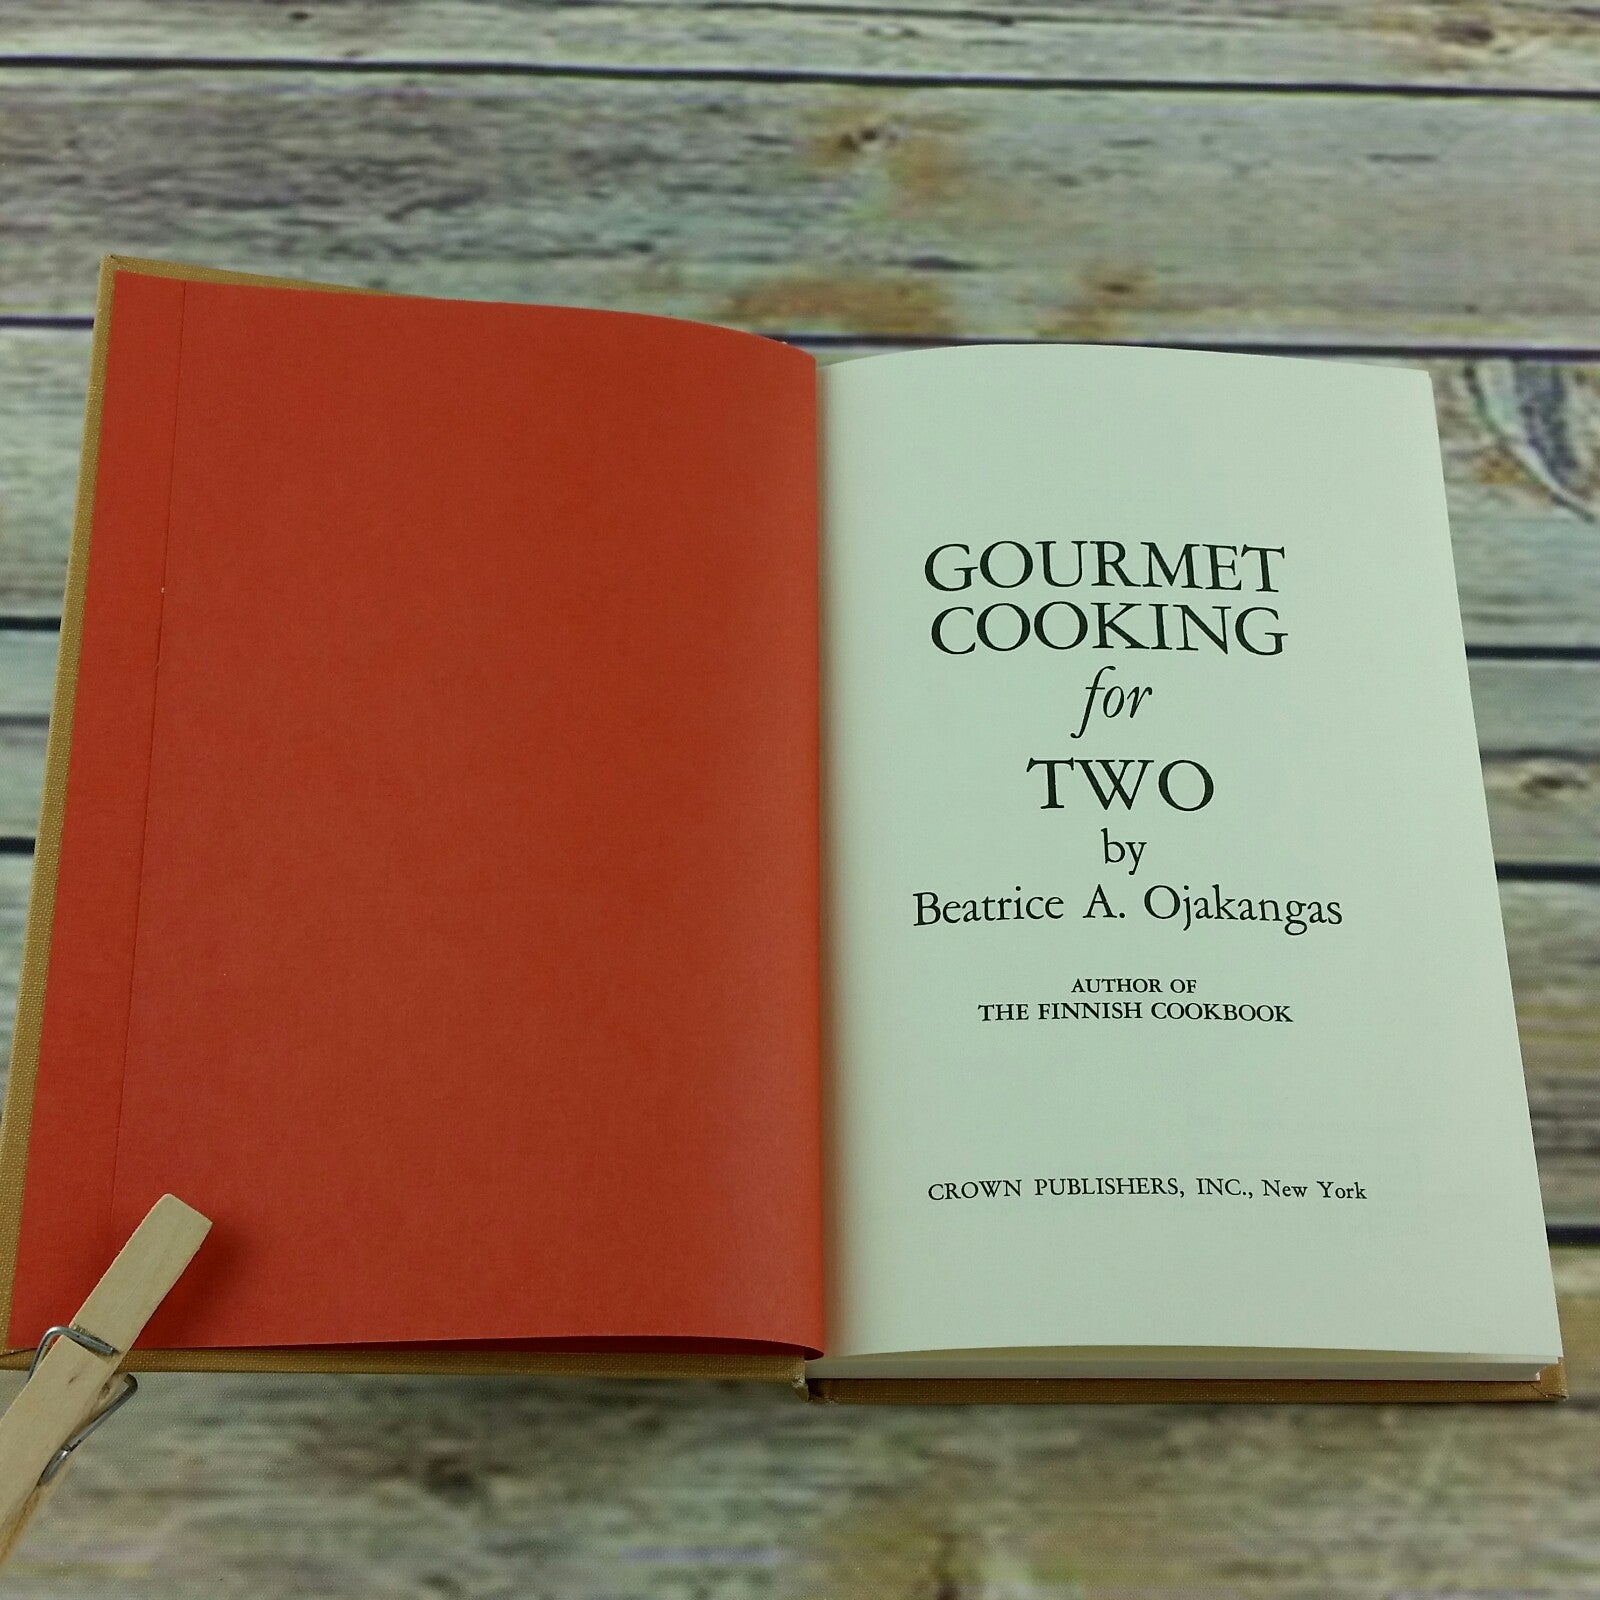 Vintage Cookbook Gourmet Cooking for Two Recipes 1970 Beatrice Ojakanagas - At Grandma's Table